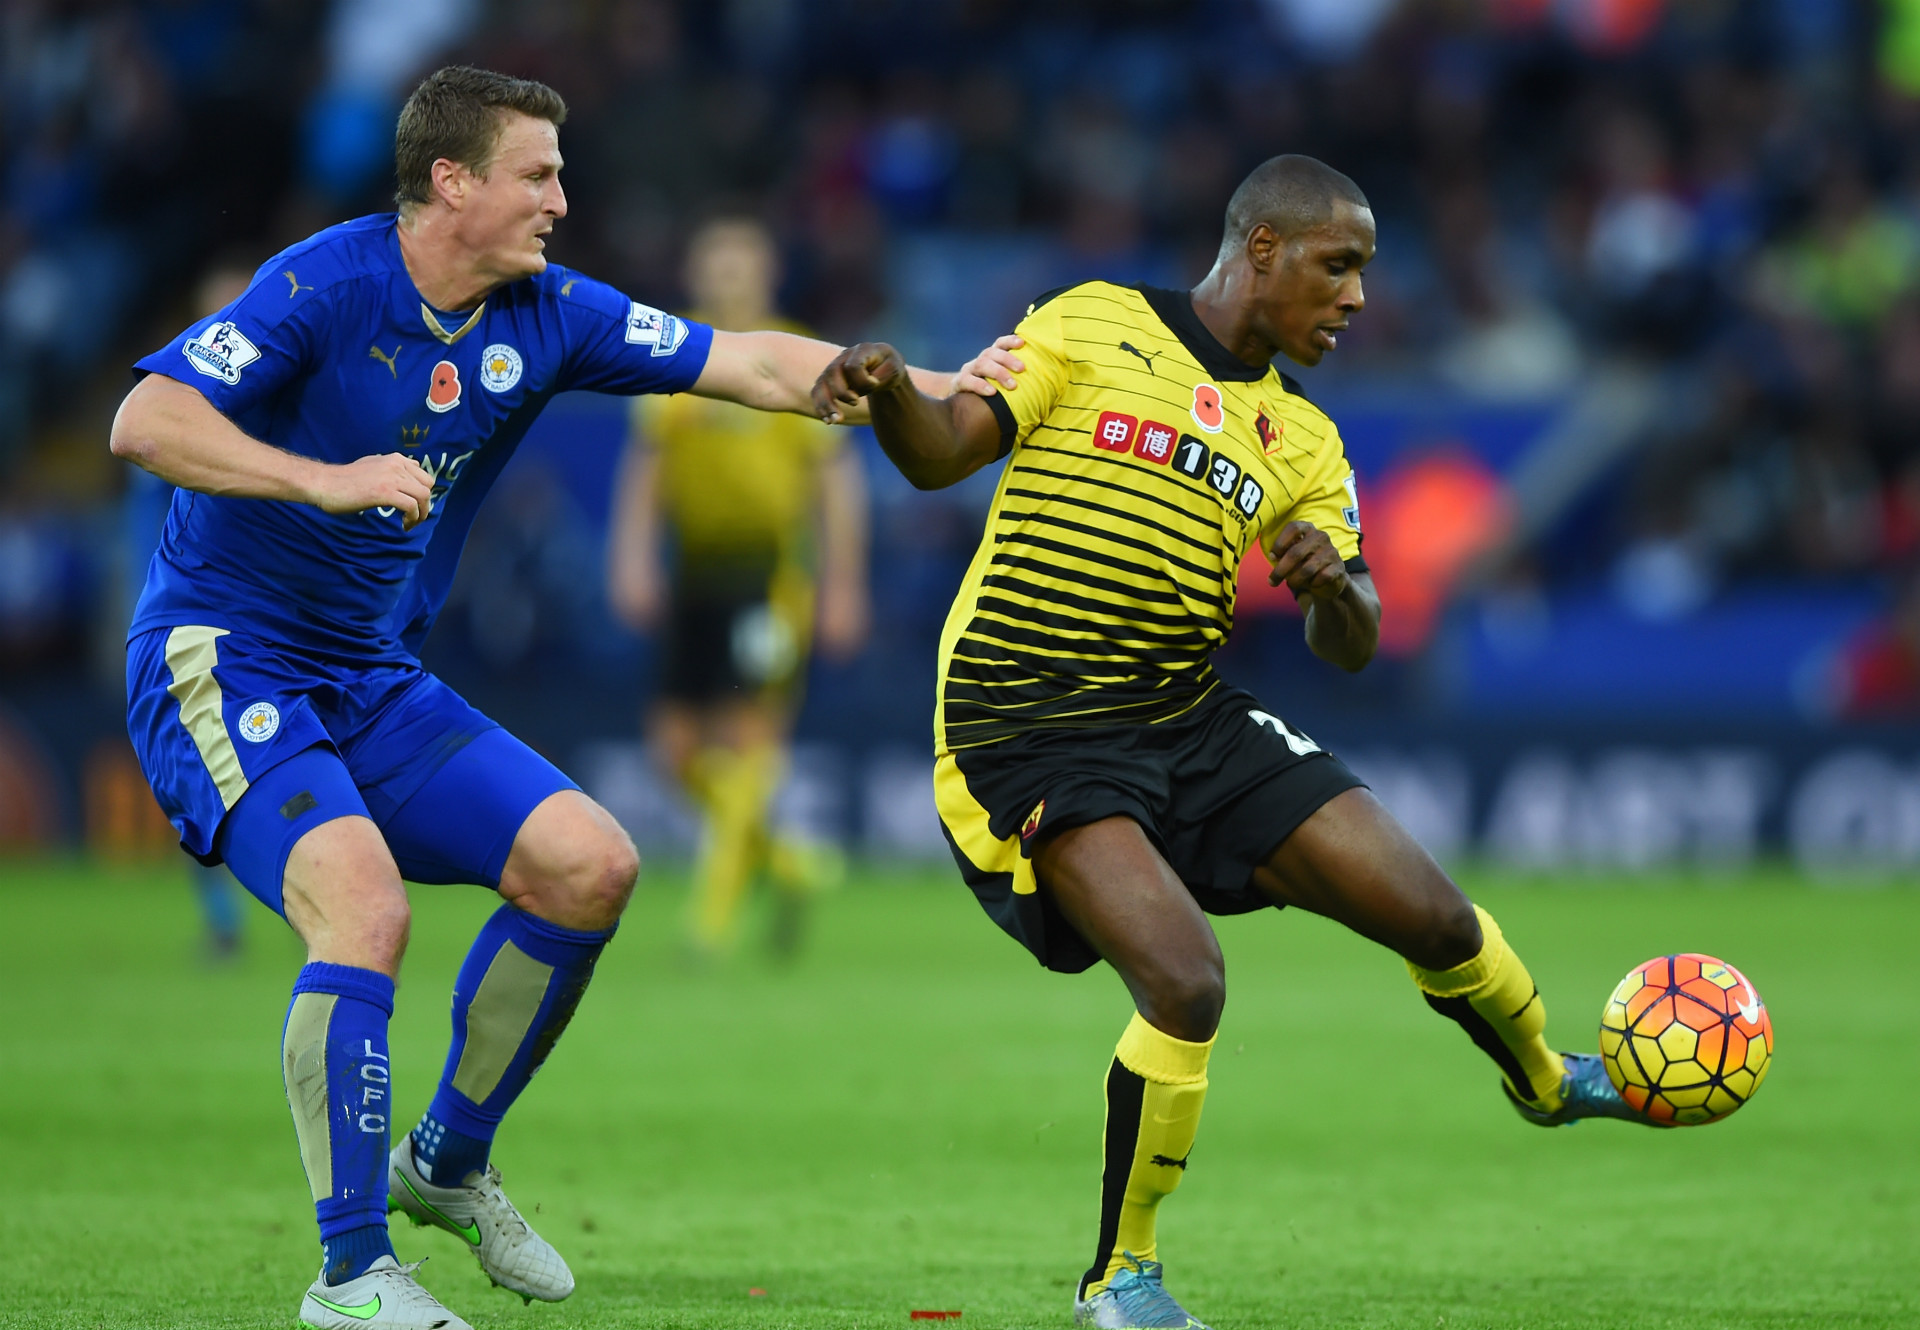 watford-vs-leicester-22h00-ngay-19-11-1